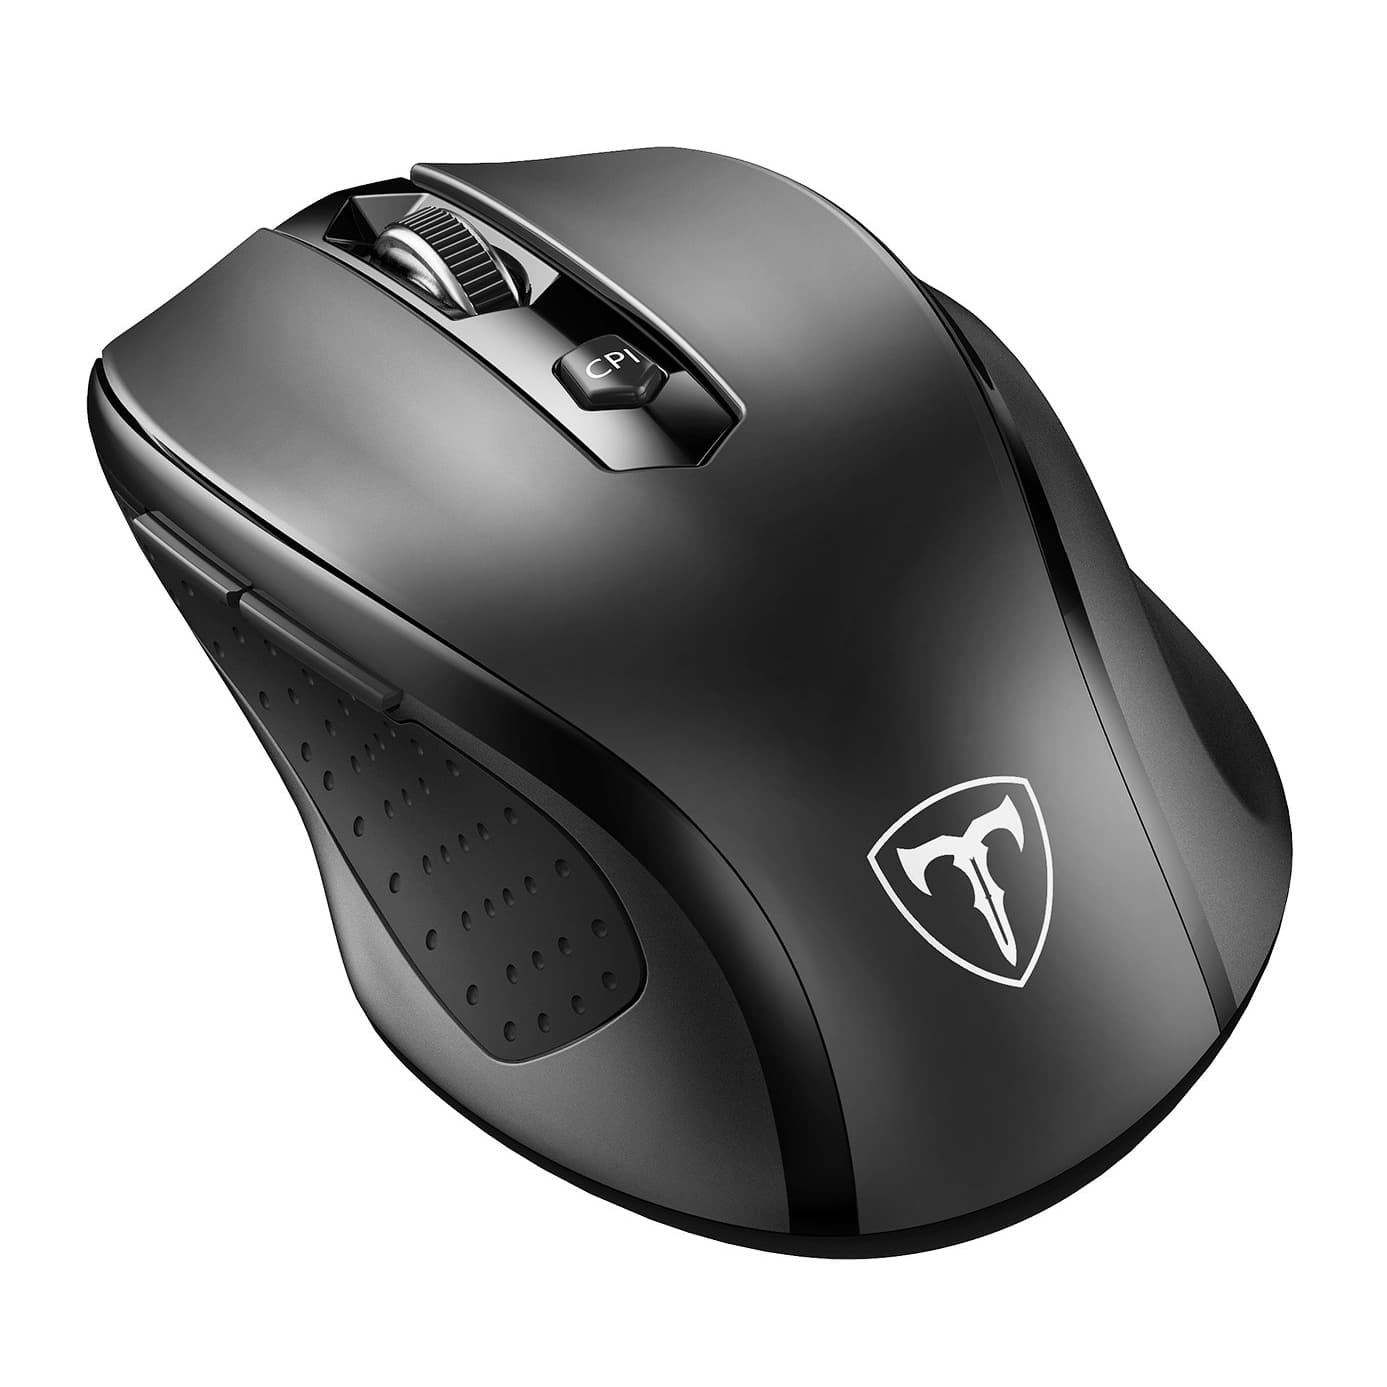 Top 10 Best Wireless Computer Mouses In 2019 Reviews